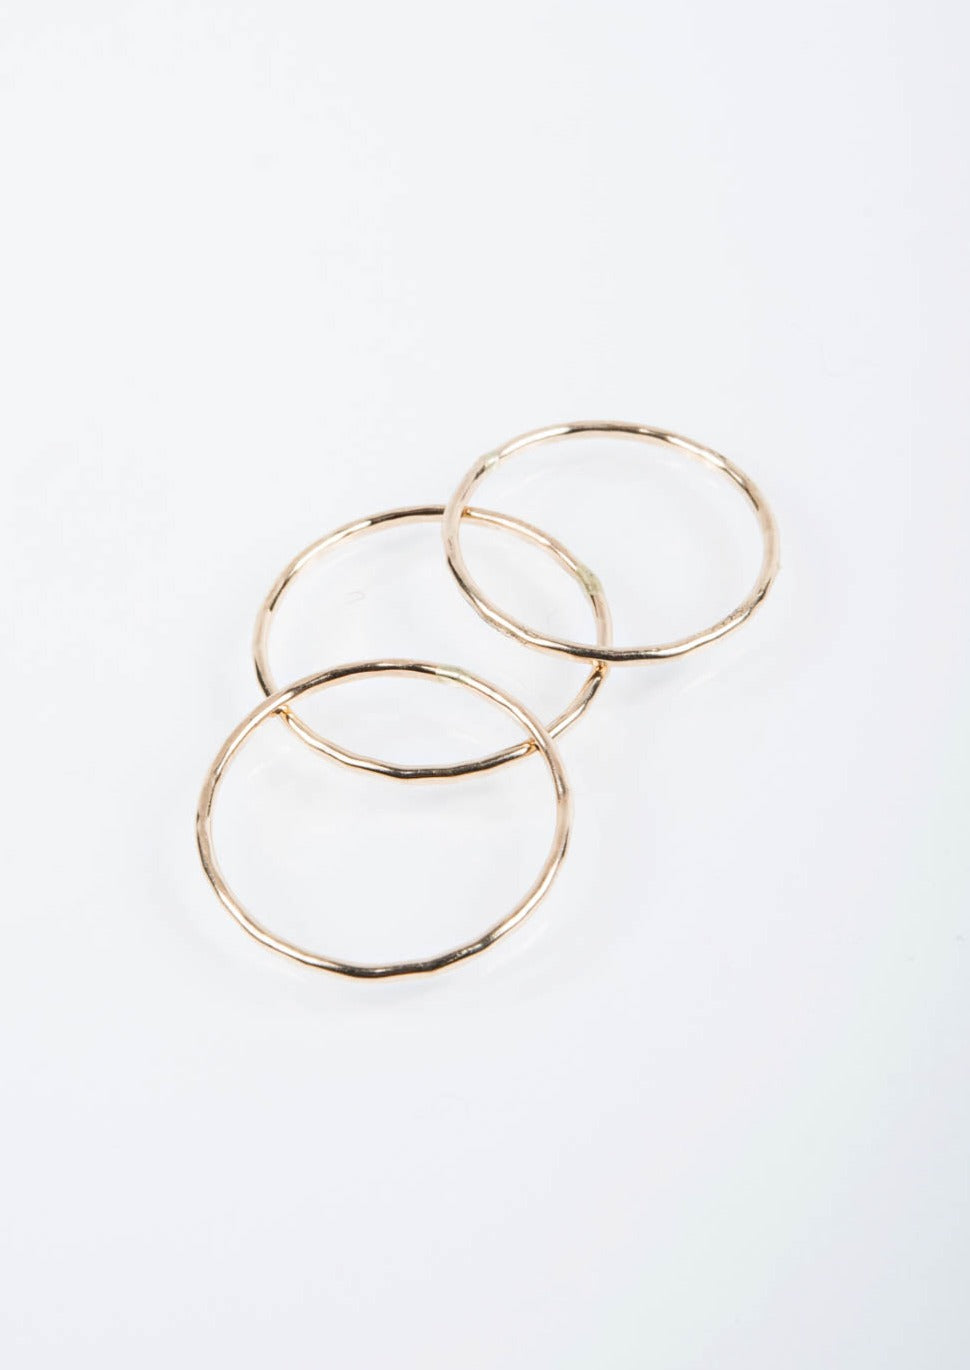 HAND HAMMERED RINGS